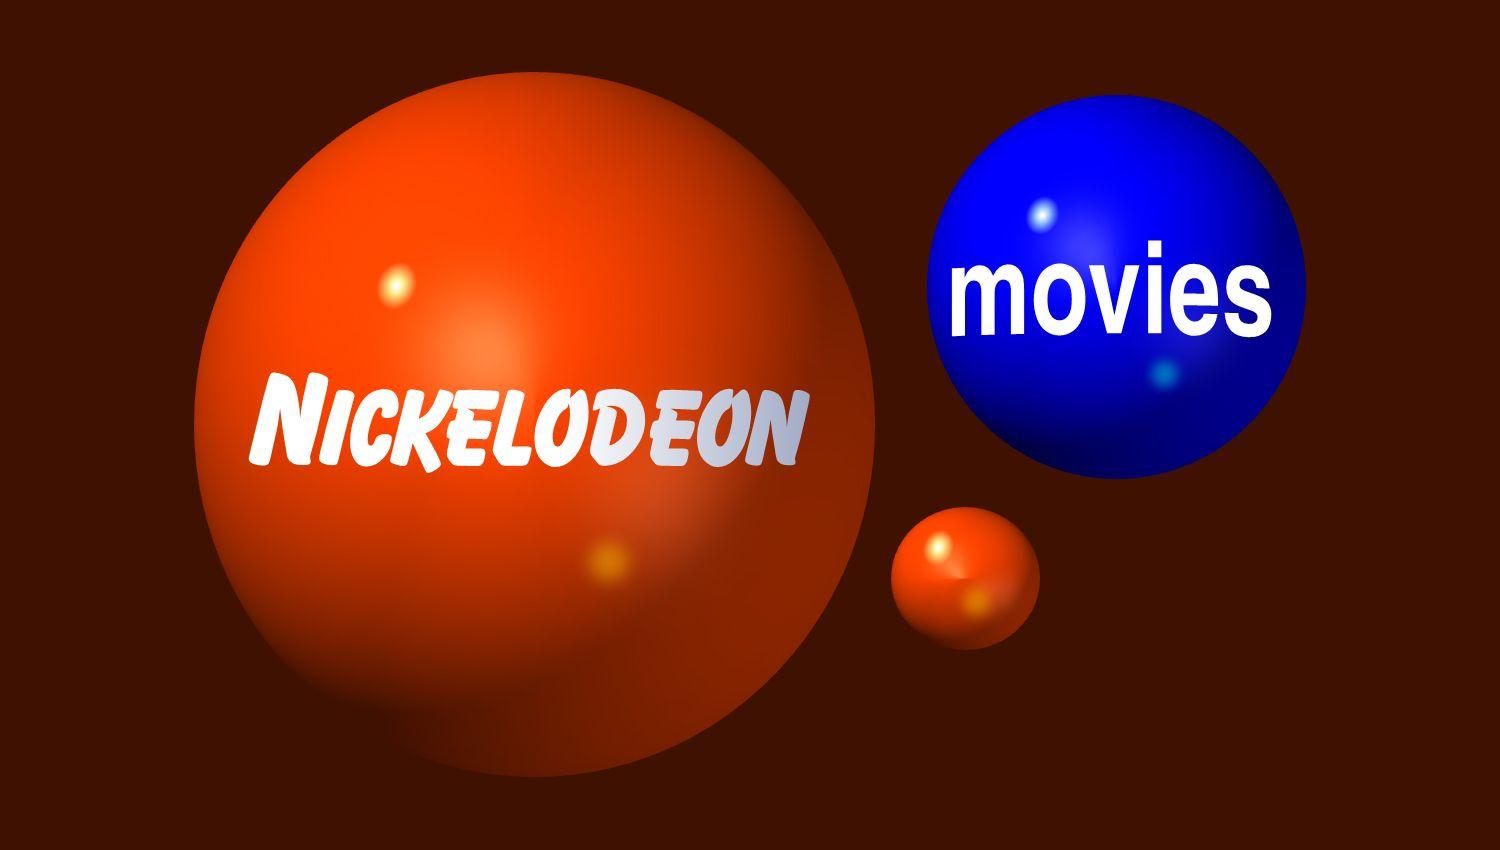 Nickelodeon Balloon Logo - Nickelodeon Logo, Nickelodeon Symbol Meaning, History and Evolution